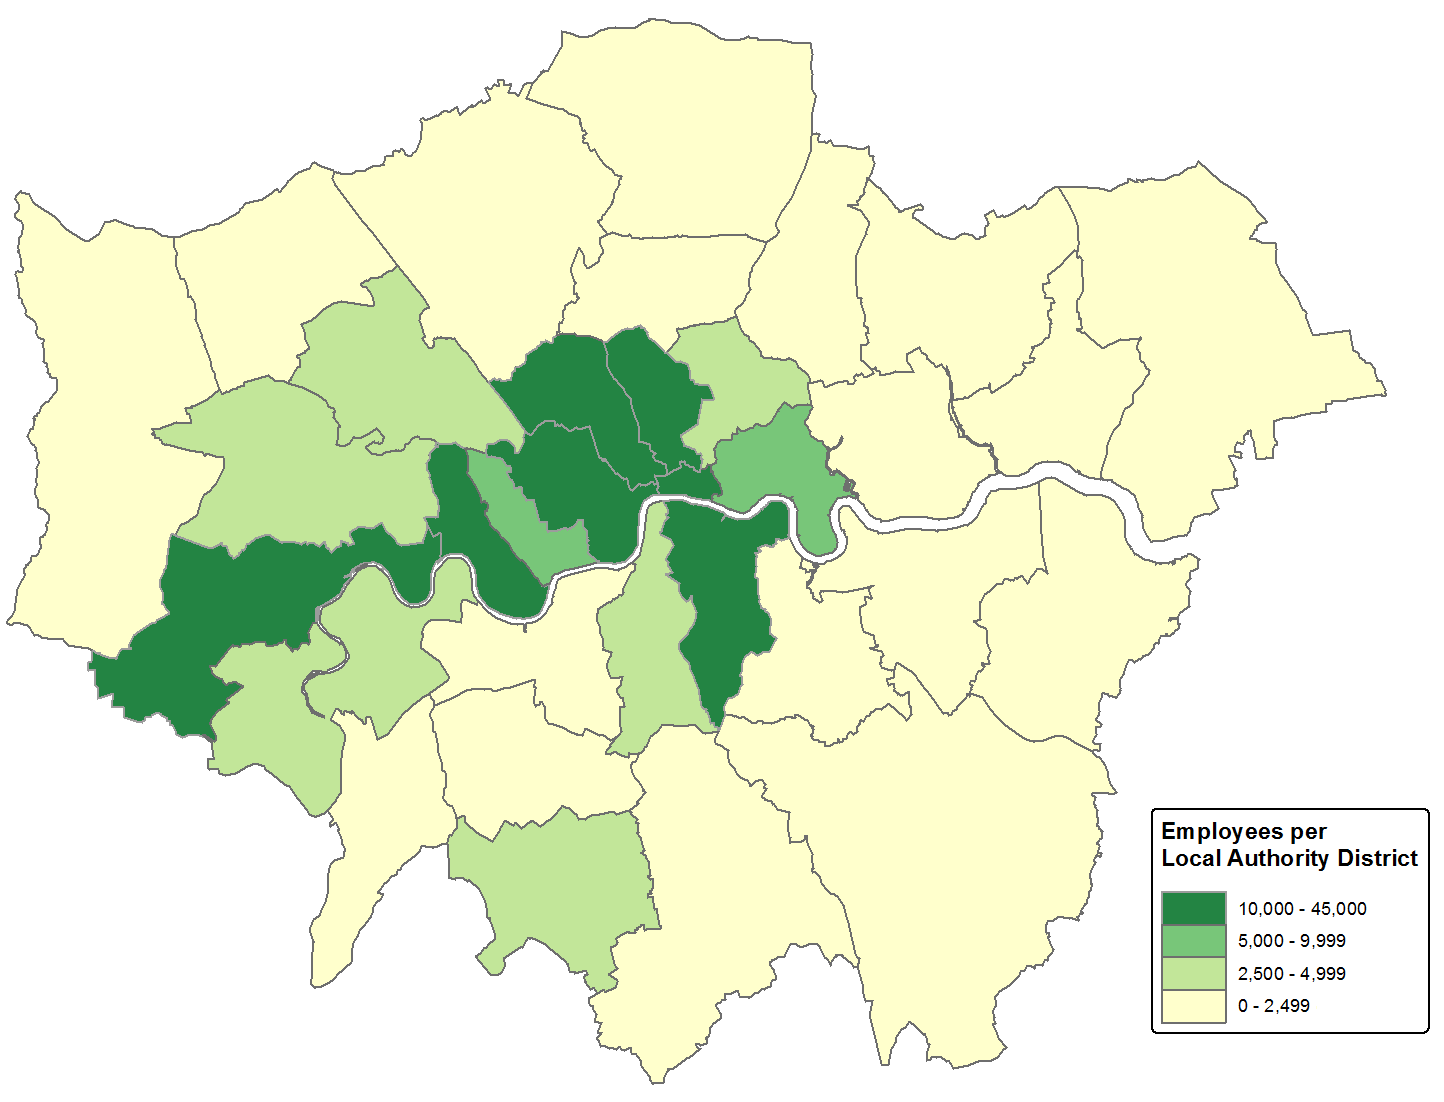 Publishing and Communications employees were concentrated in few local authorities, mainly central London and a few authorities in south western London